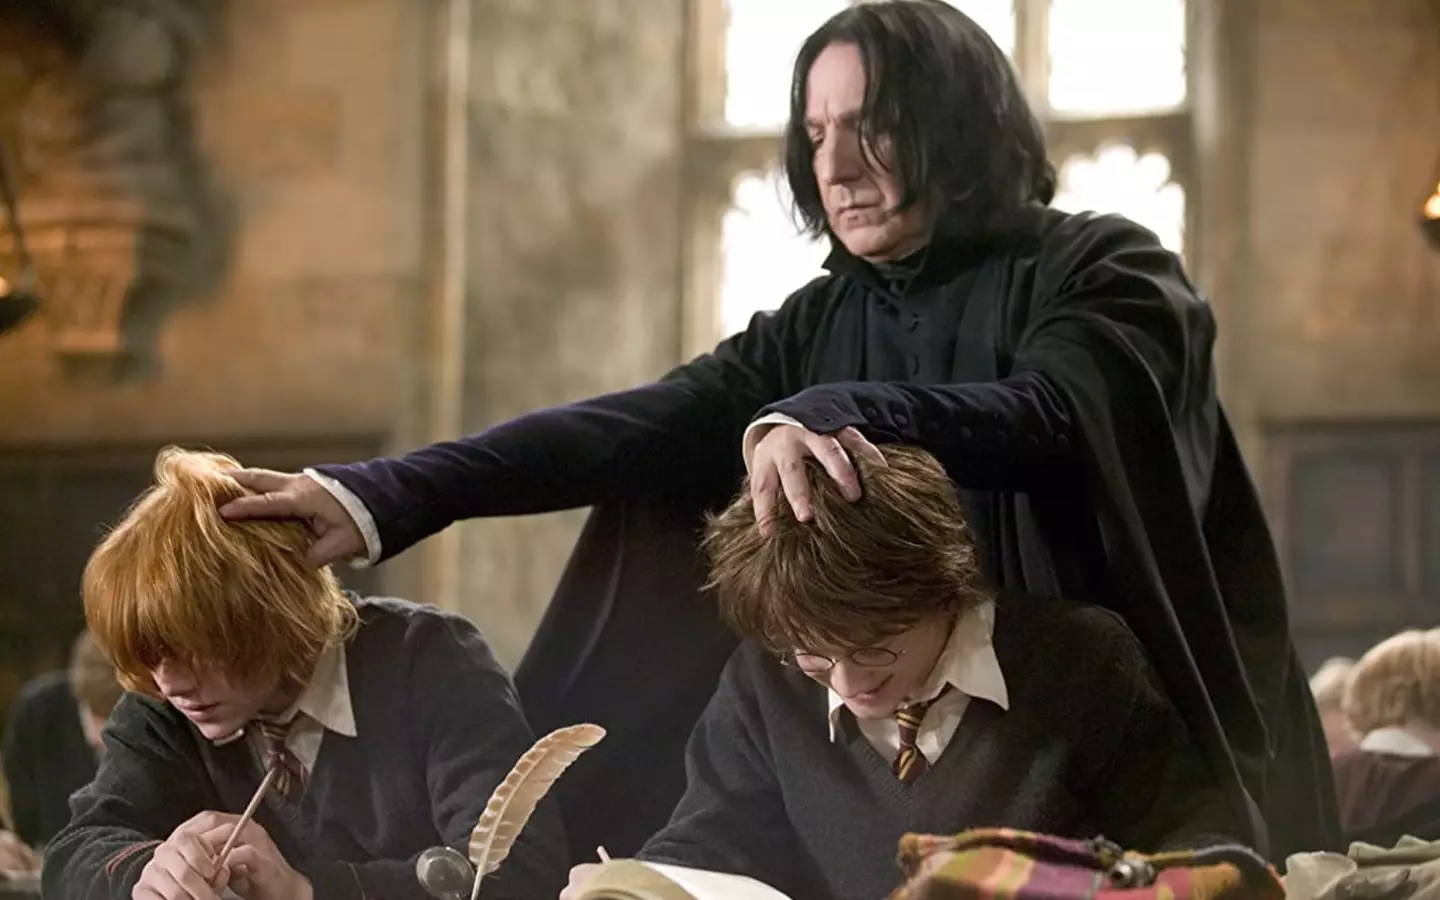 The deleted scene shows Snape is a totally different light.